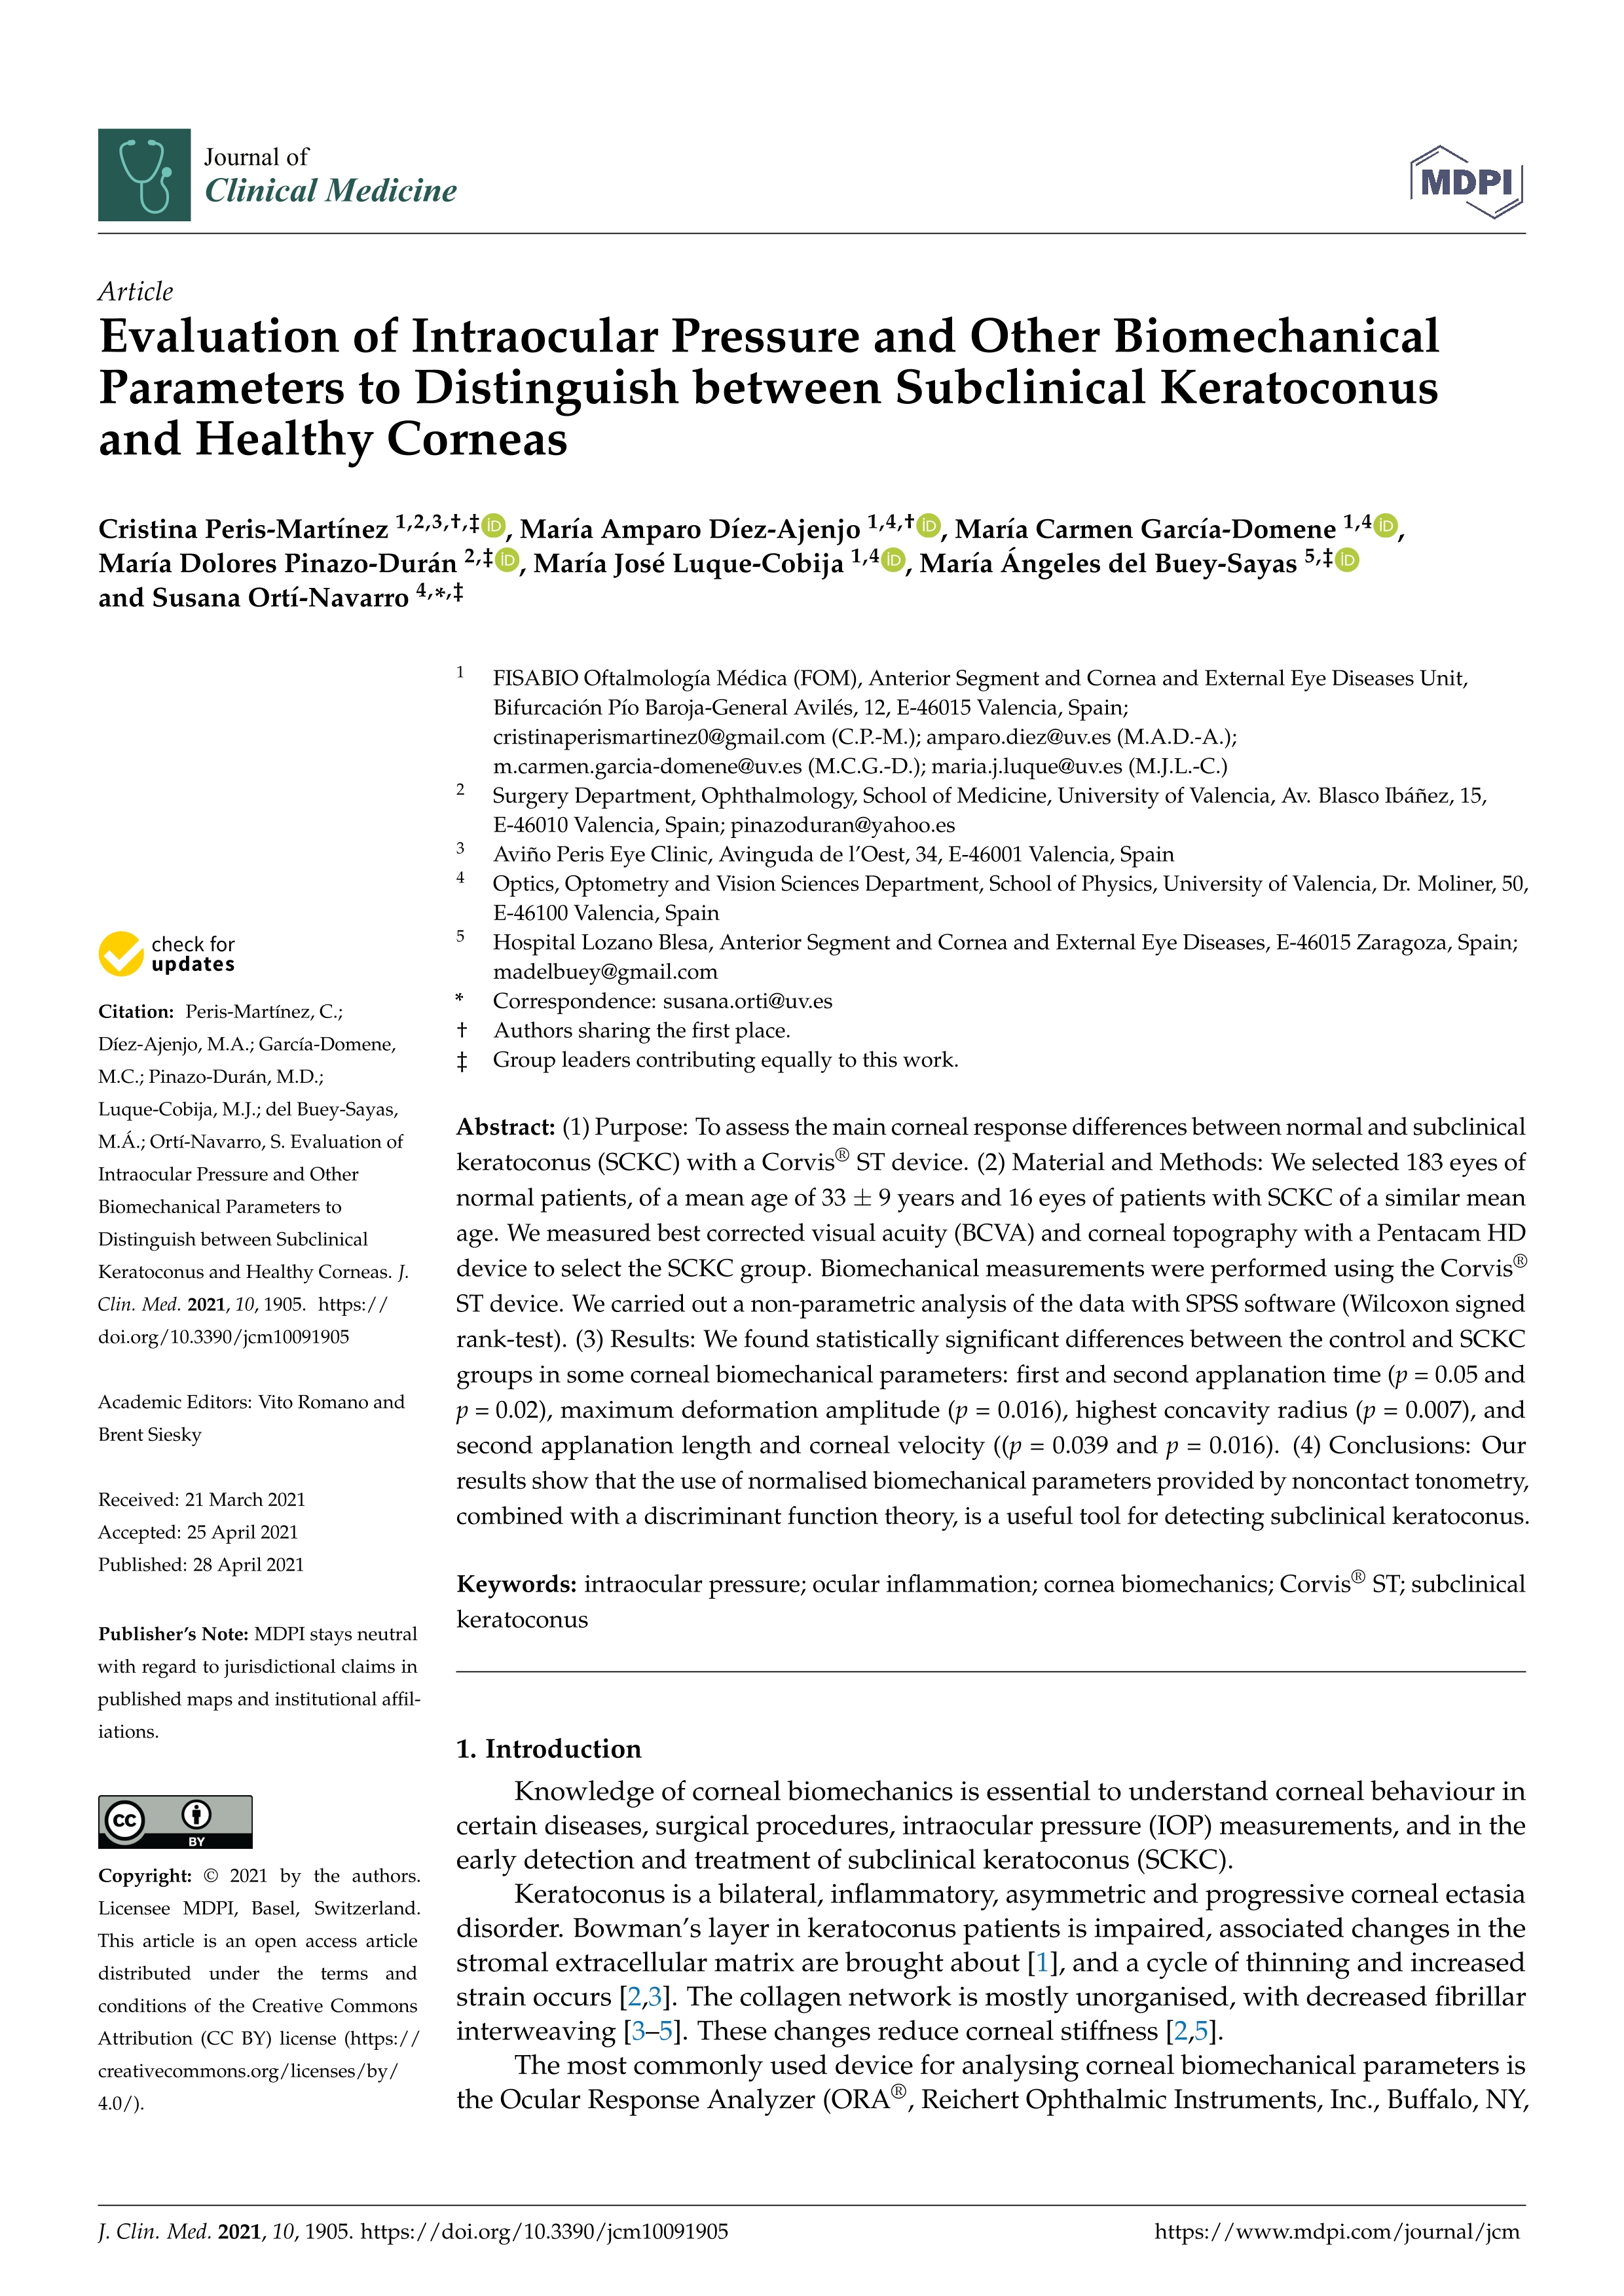 Evaluation of intraocular pressure and other biomechanical parameters to distinguish between subclinical keratoconus and healthy corneas